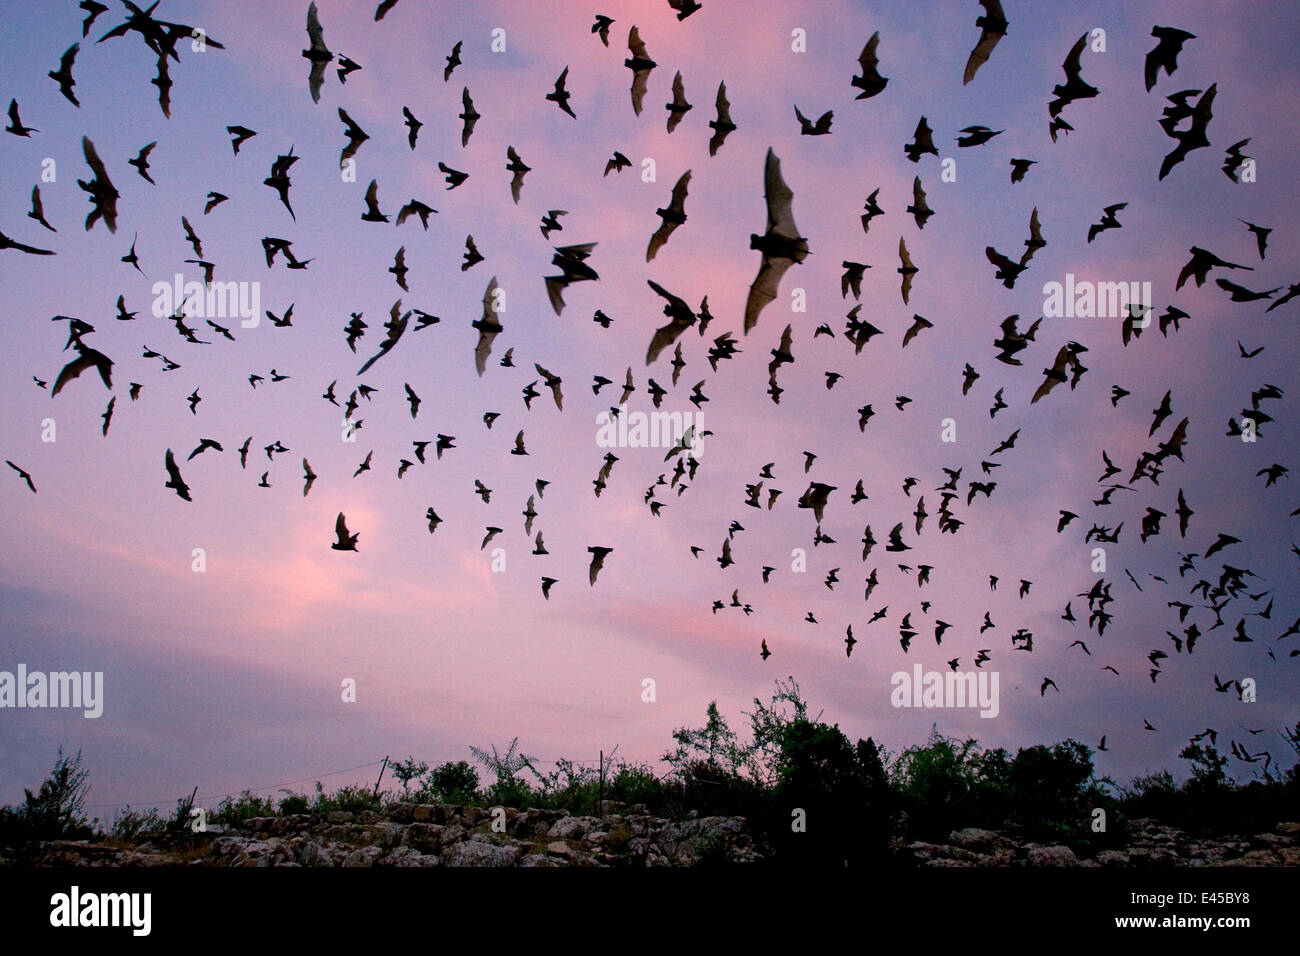 Mexican Free-tailed Bat (Tadarida brasiliensis mexicana) emerging at dusk from Frio Cave, near Concan in the Texas Hill Country, Texas, USA. Stock Photo